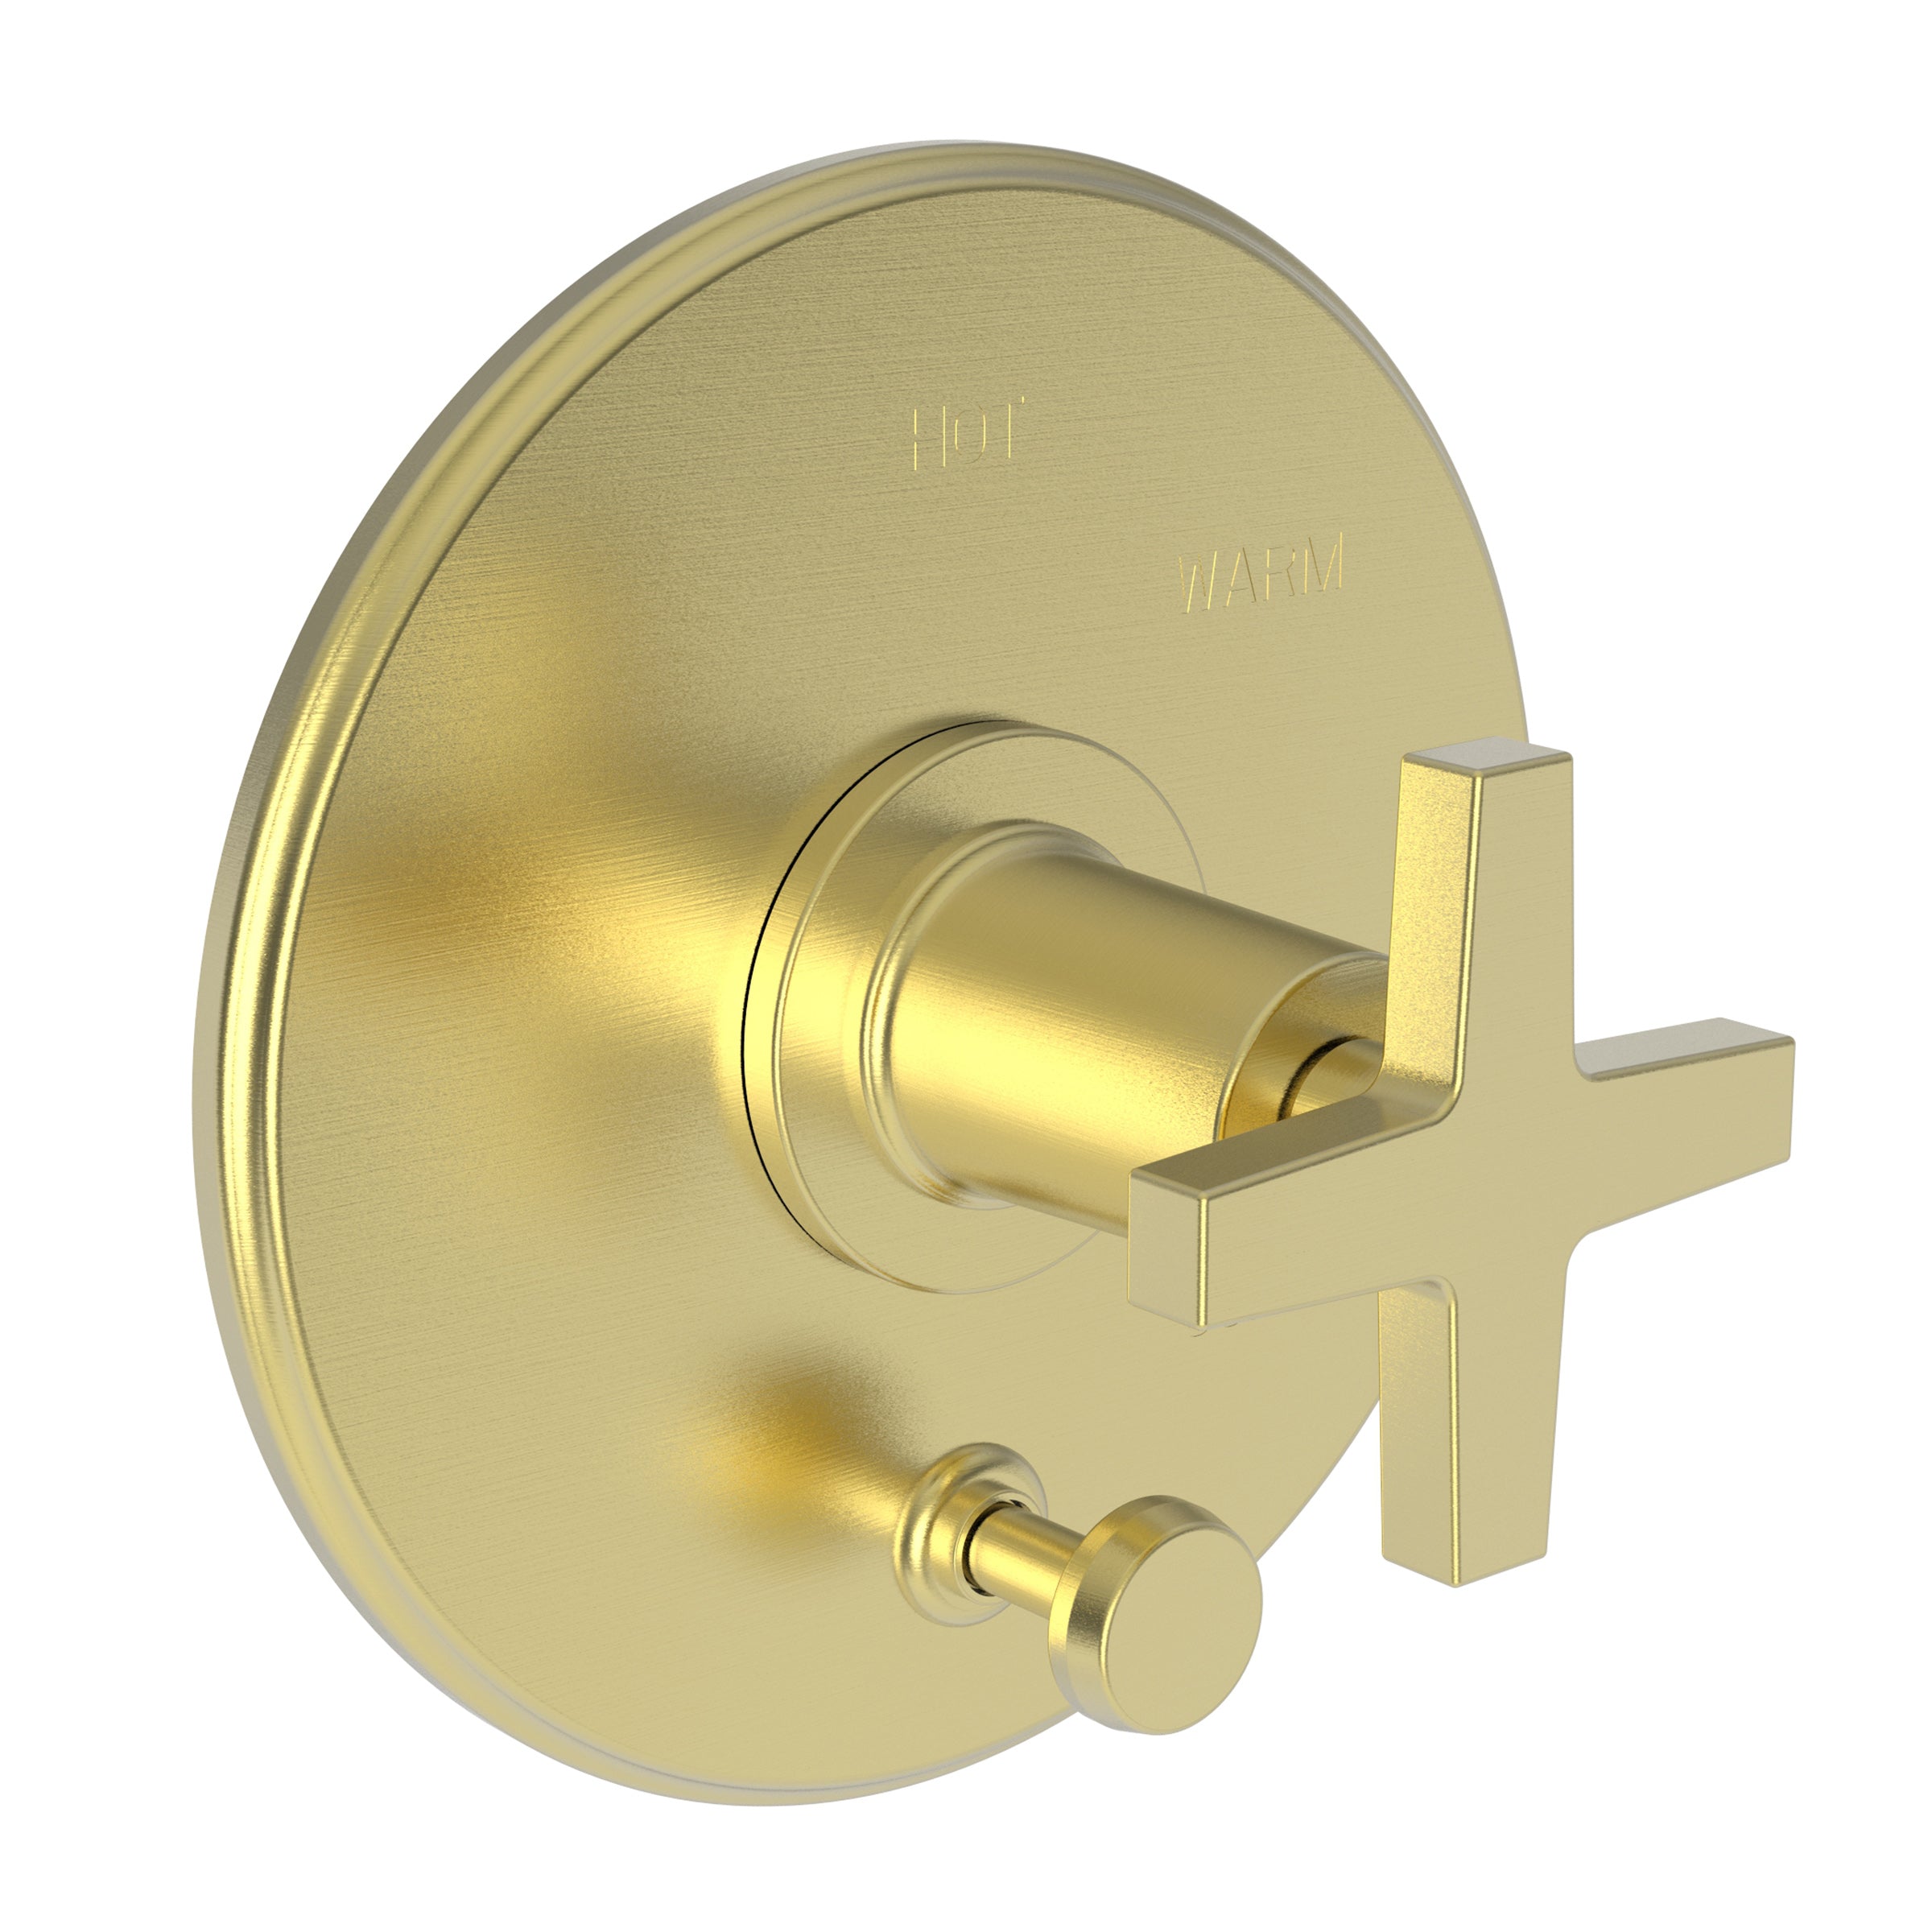 Newport Brass Dorrance Balanced Pressure Tub & Shower Diverter Plate with Handle. Less Showerhead, arm and flange.